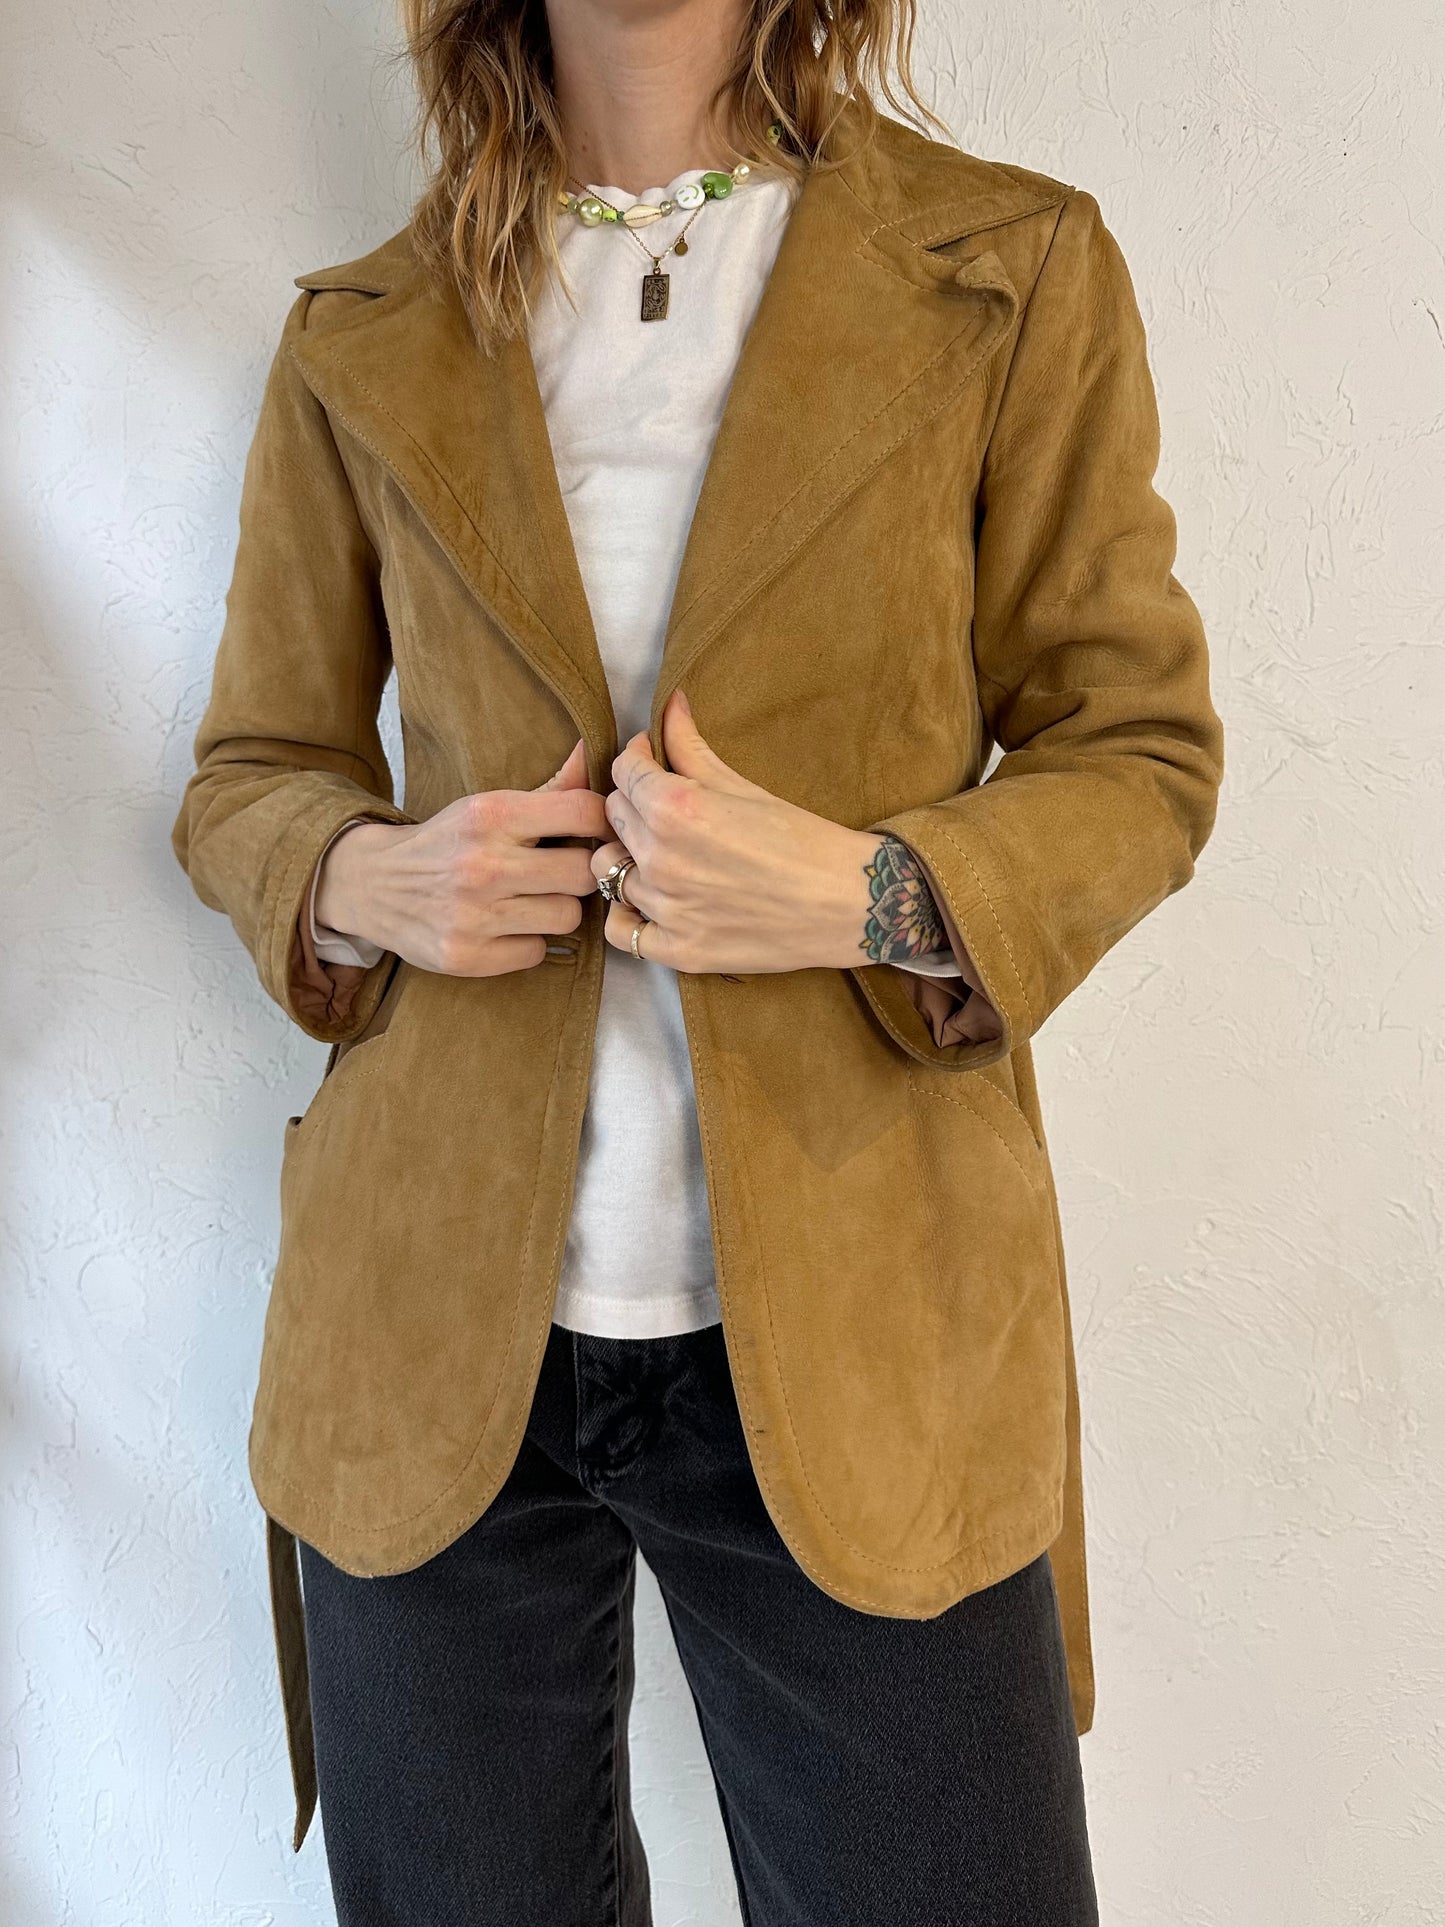 70s 'Imperial' Suede Leather Jacket / Small